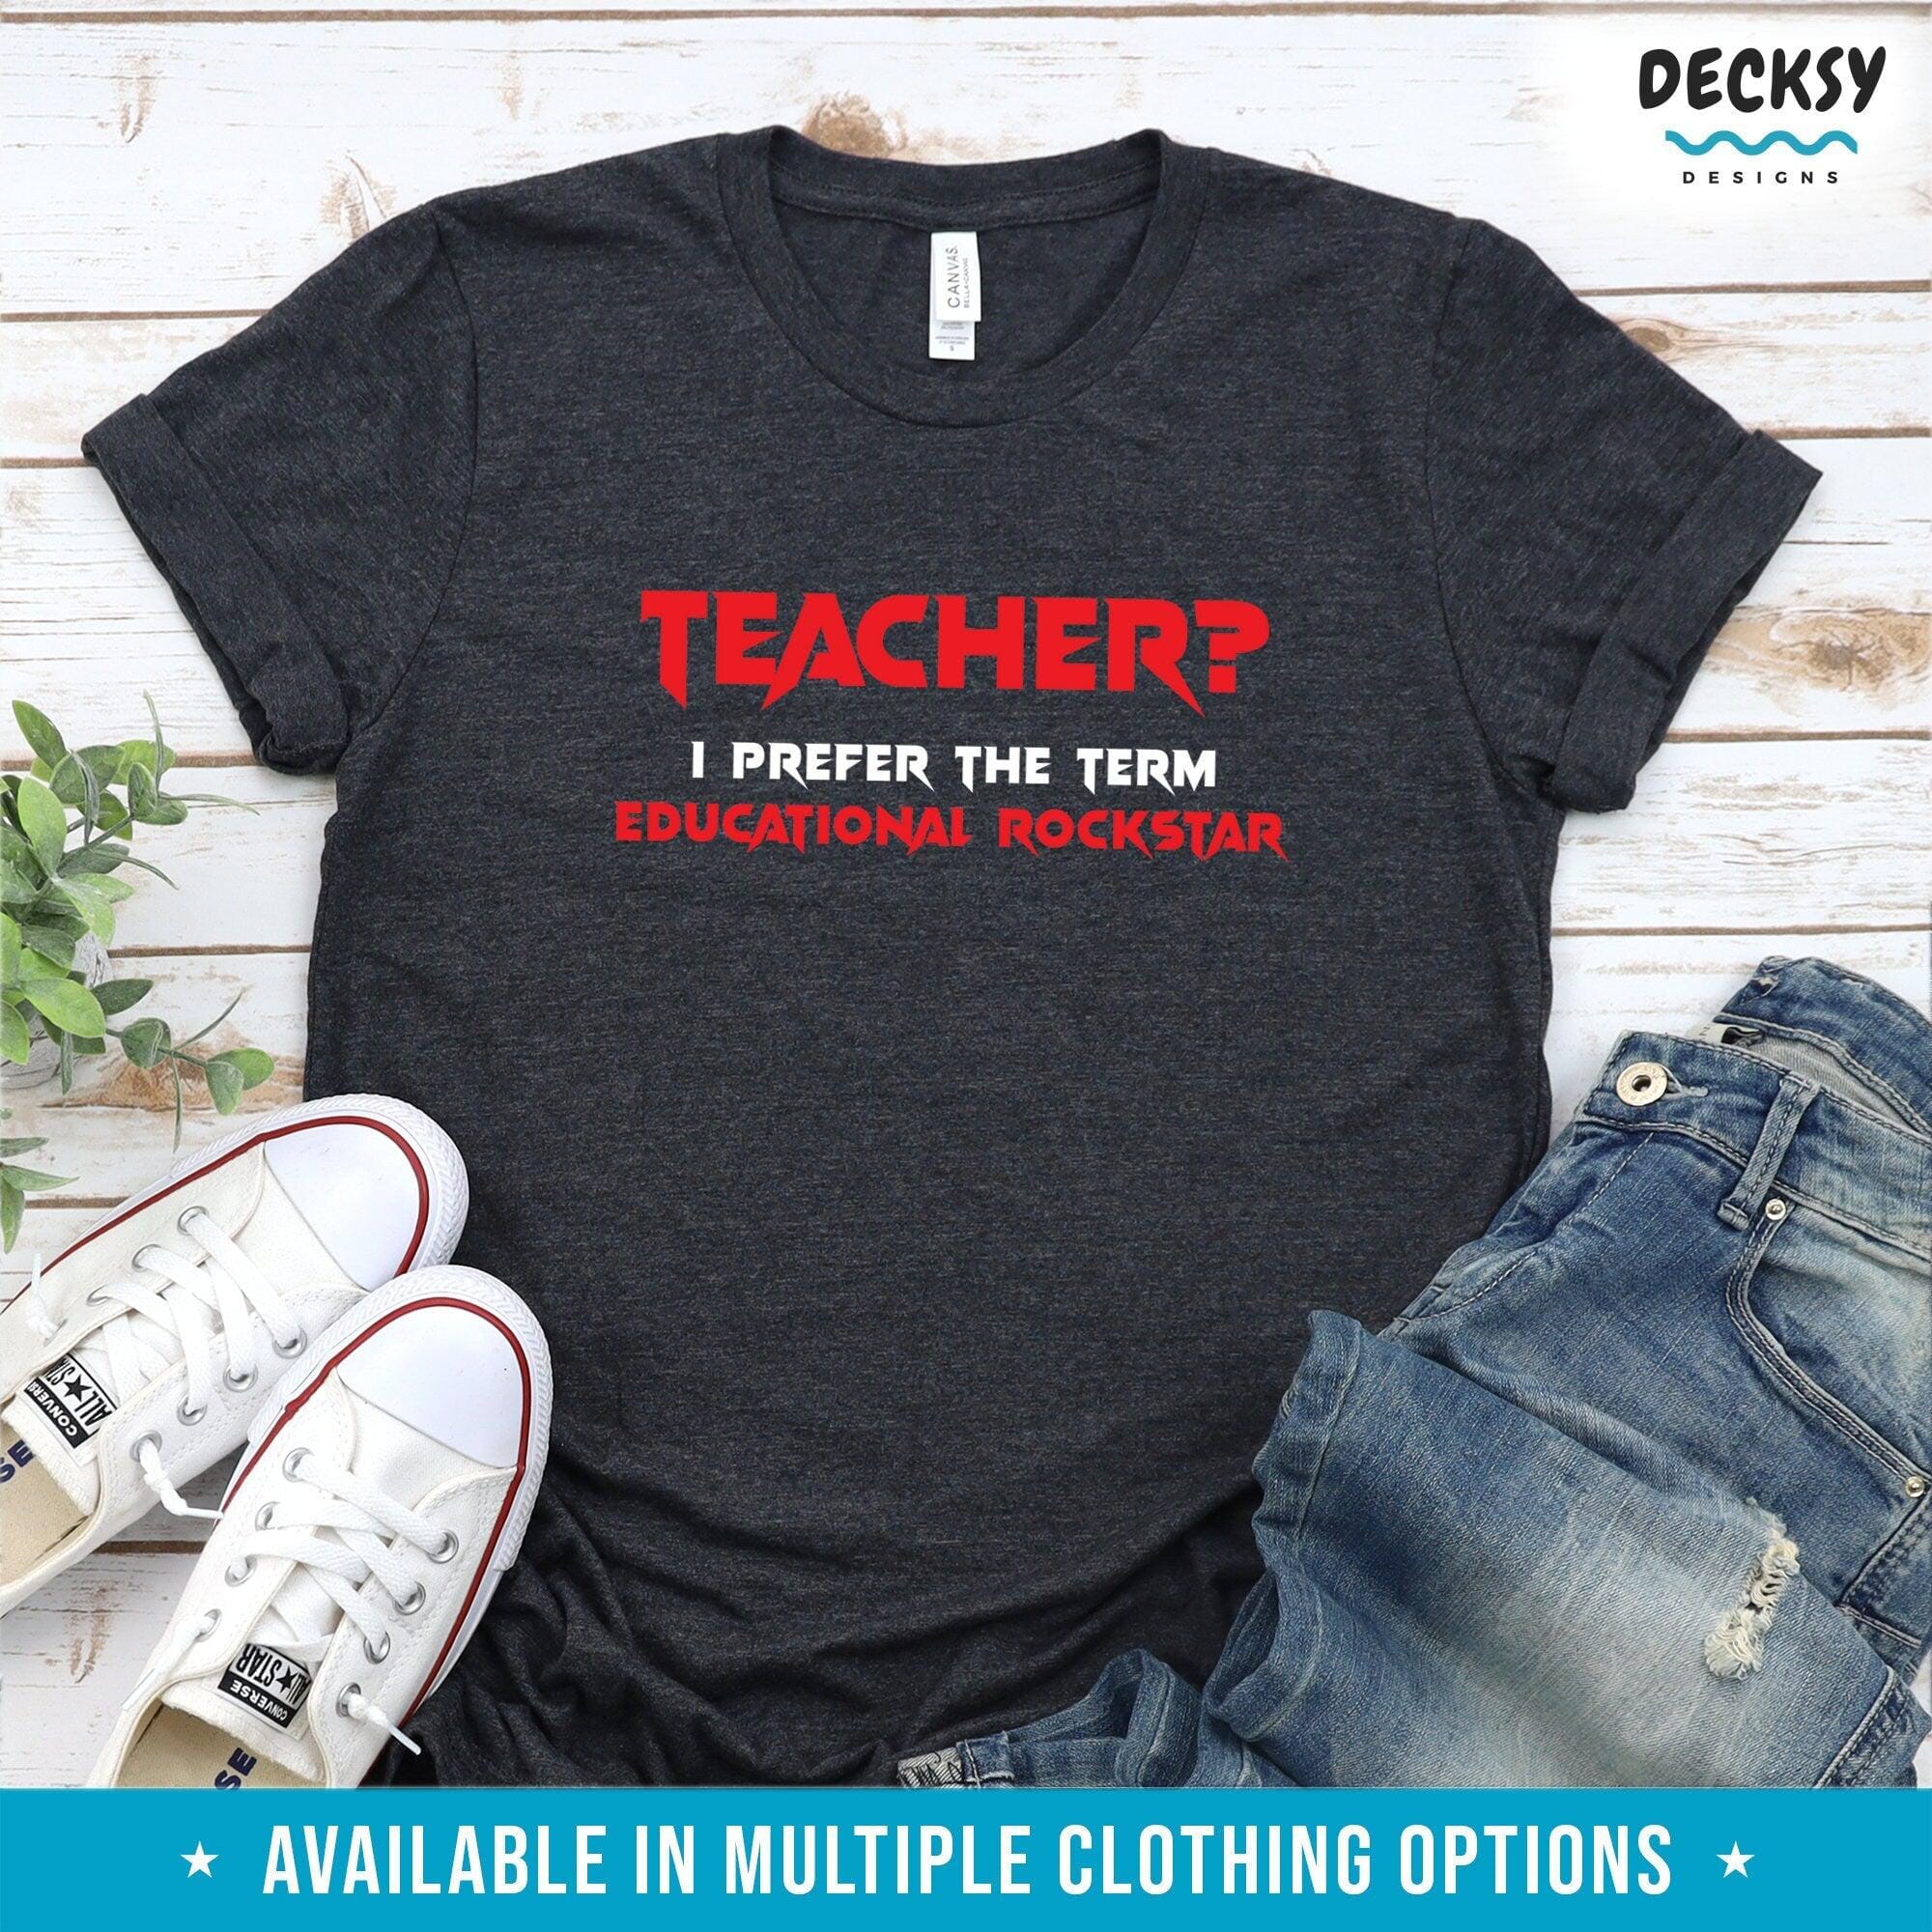 Best Teacher T-Shirt, Teaching Life Gift-Clothing:Gender-Neutral Adult Clothing:Tops & Tees:T-shirts:Graphic Tees-DecksyDesigns